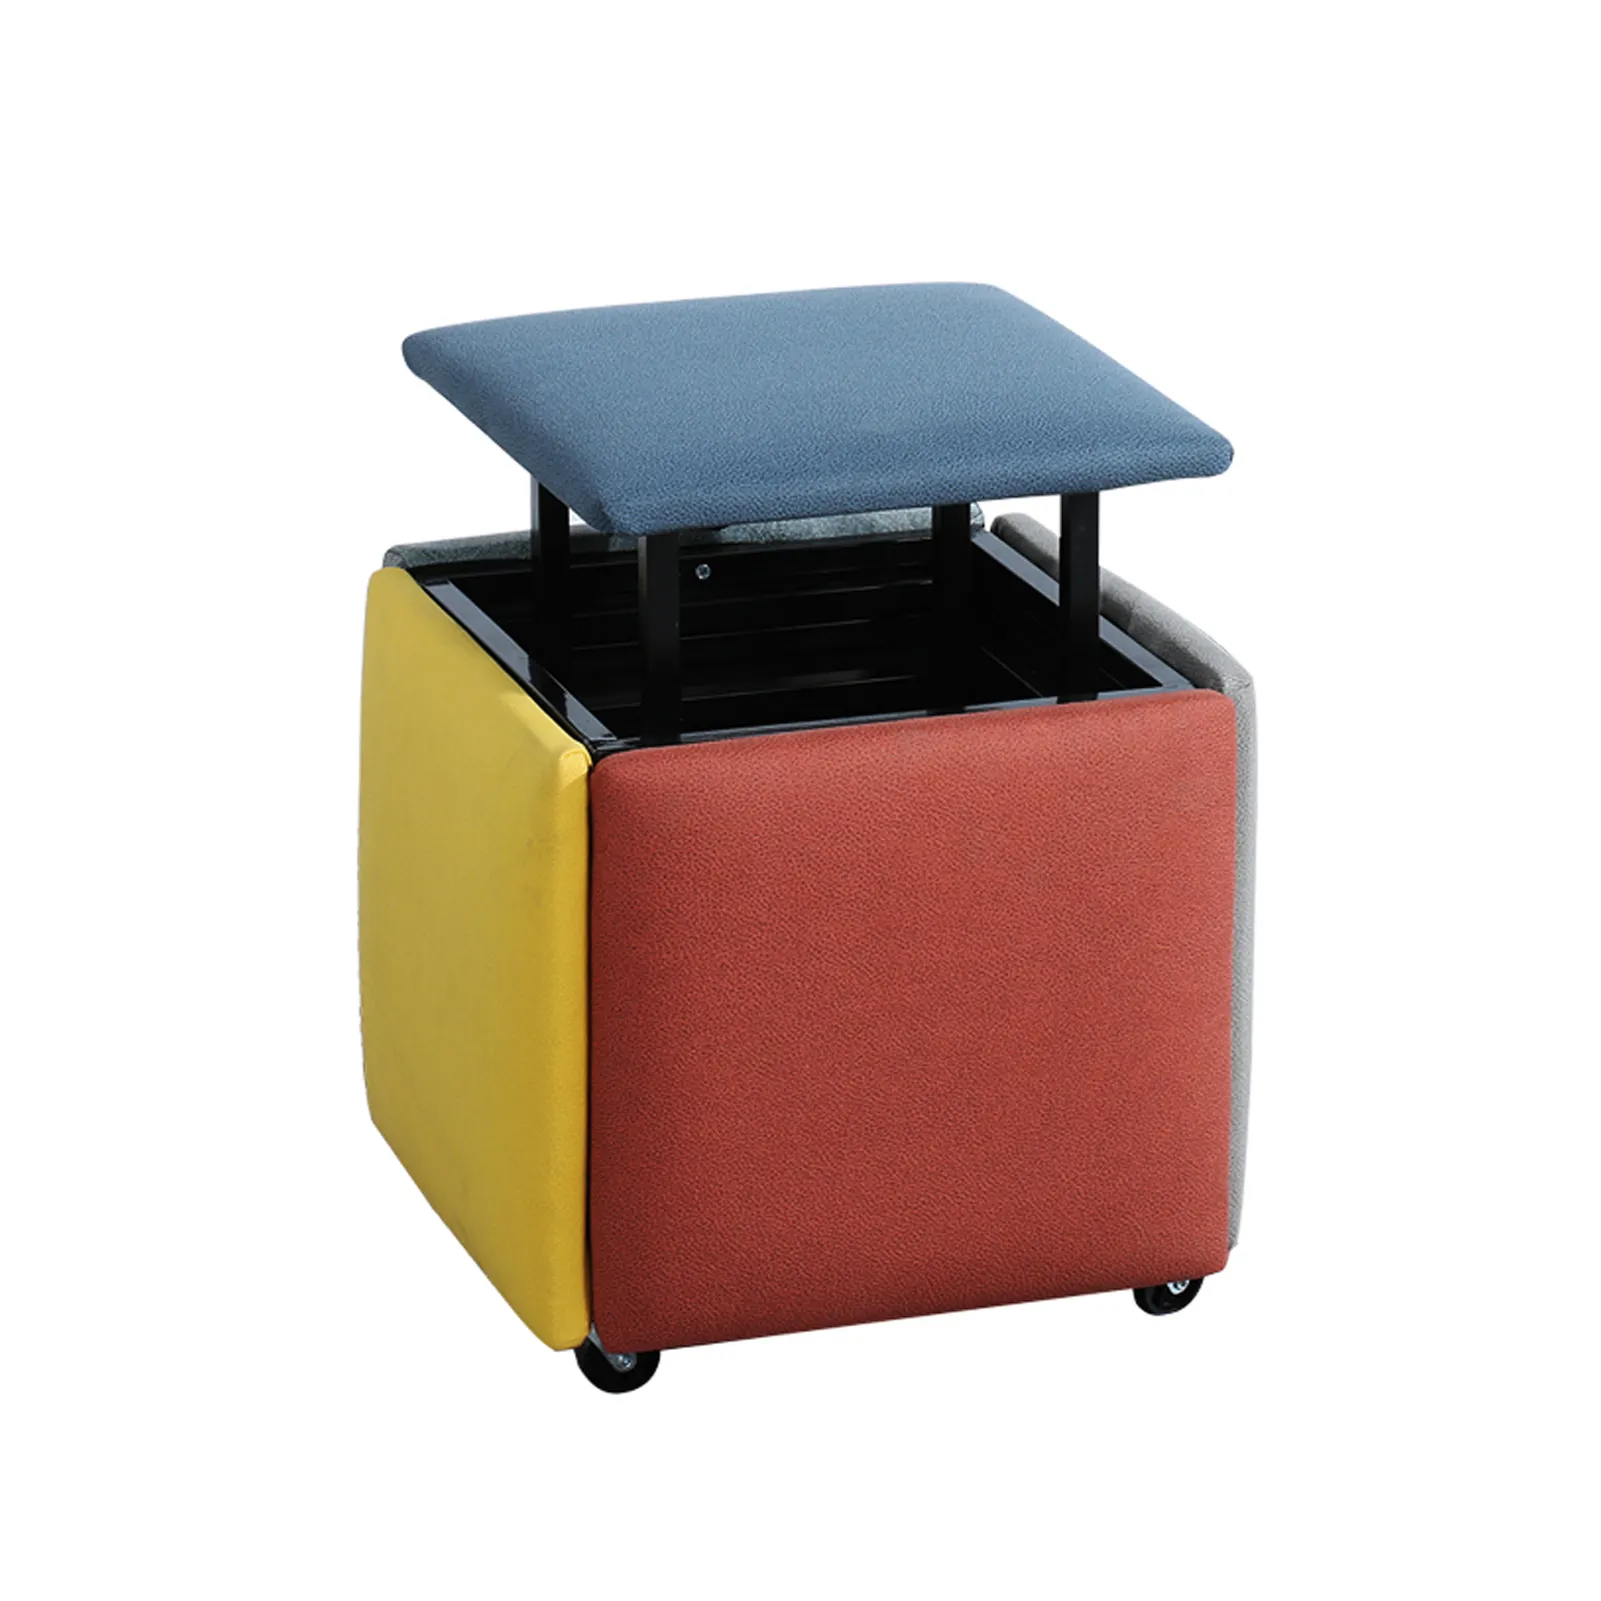 Combination Stools 5 in 1 Stackable Square Ottoman with Cushion Foot Rest Stool Fabric Padded Seat Rubik's Cube Sofa